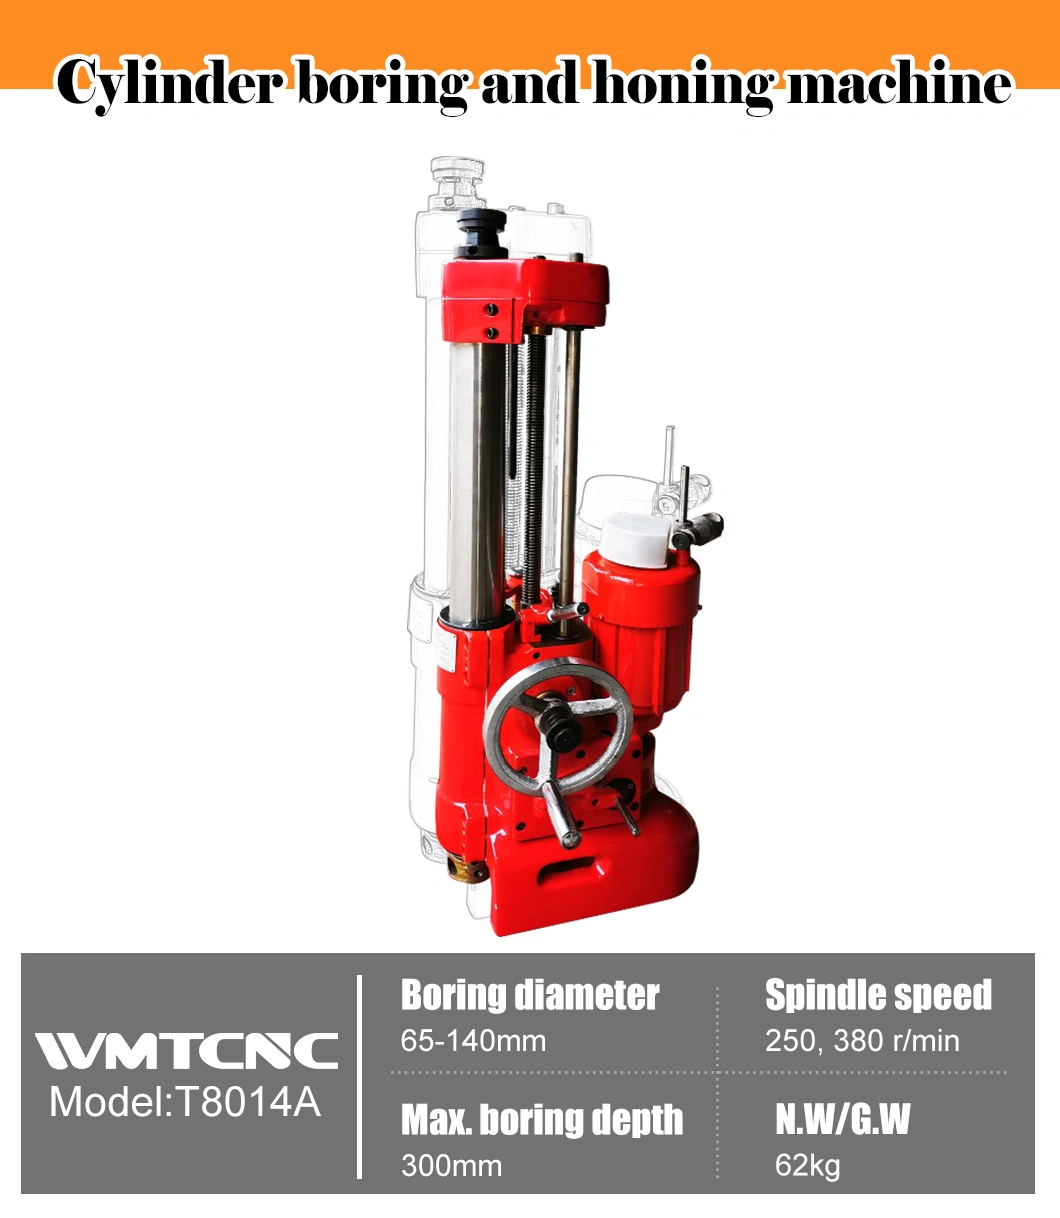 T8014A Cylinder boring and honing machine for reboring engine cylinders